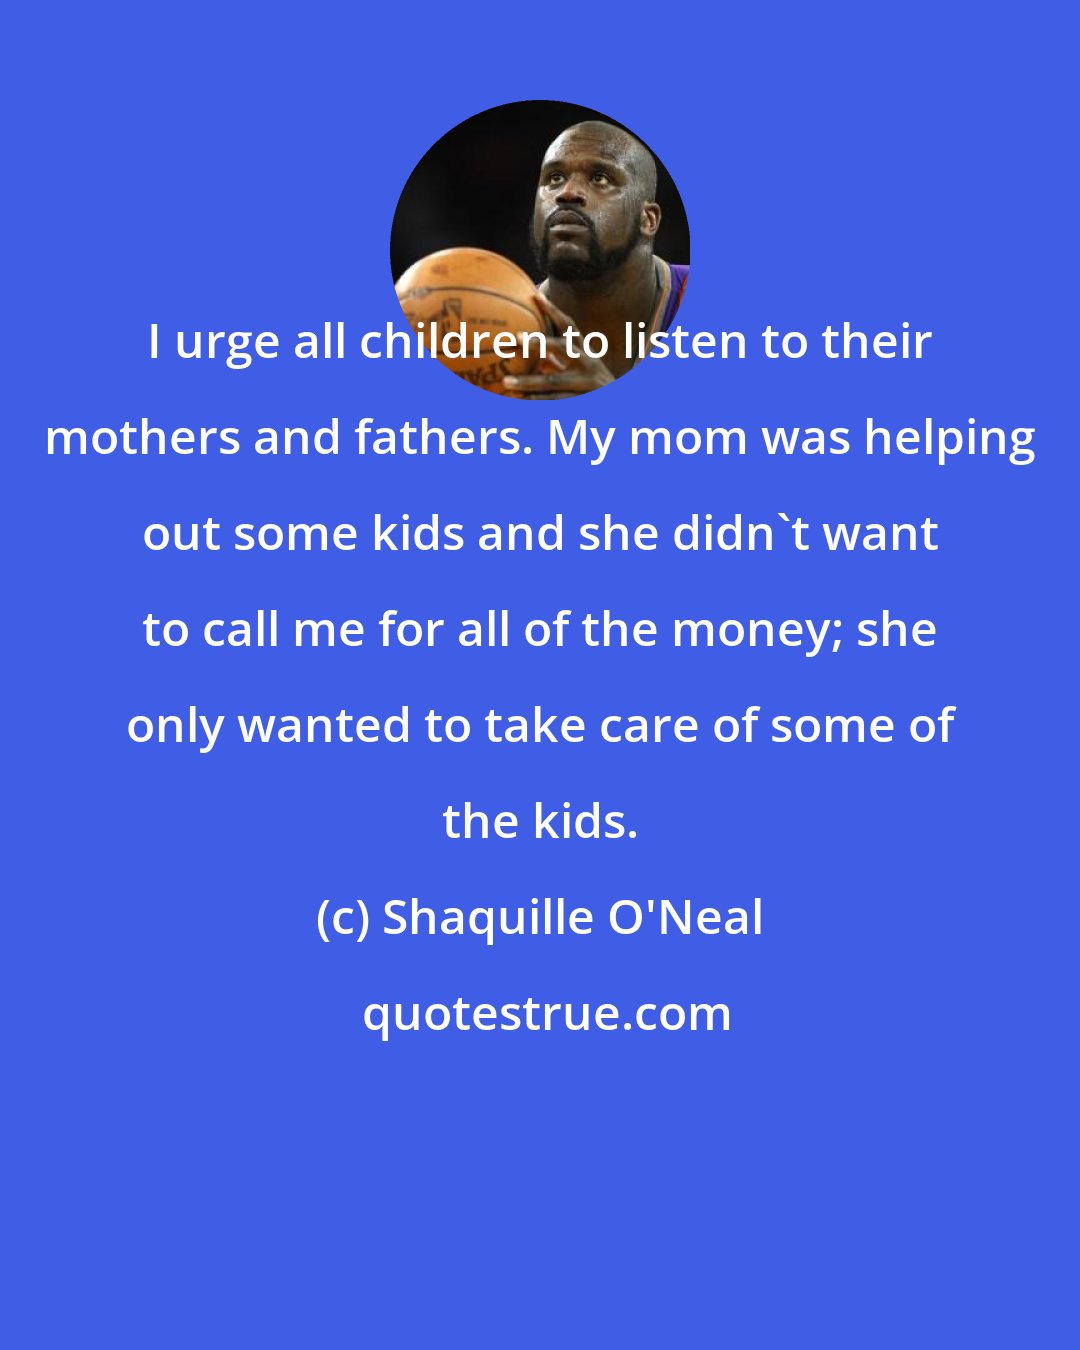 Shaquille O'Neal: I urge all children to listen to their mothers and fathers. My mom was helping out some kids and she didn't want to call me for all of the money; she only wanted to take care of some of the kids.